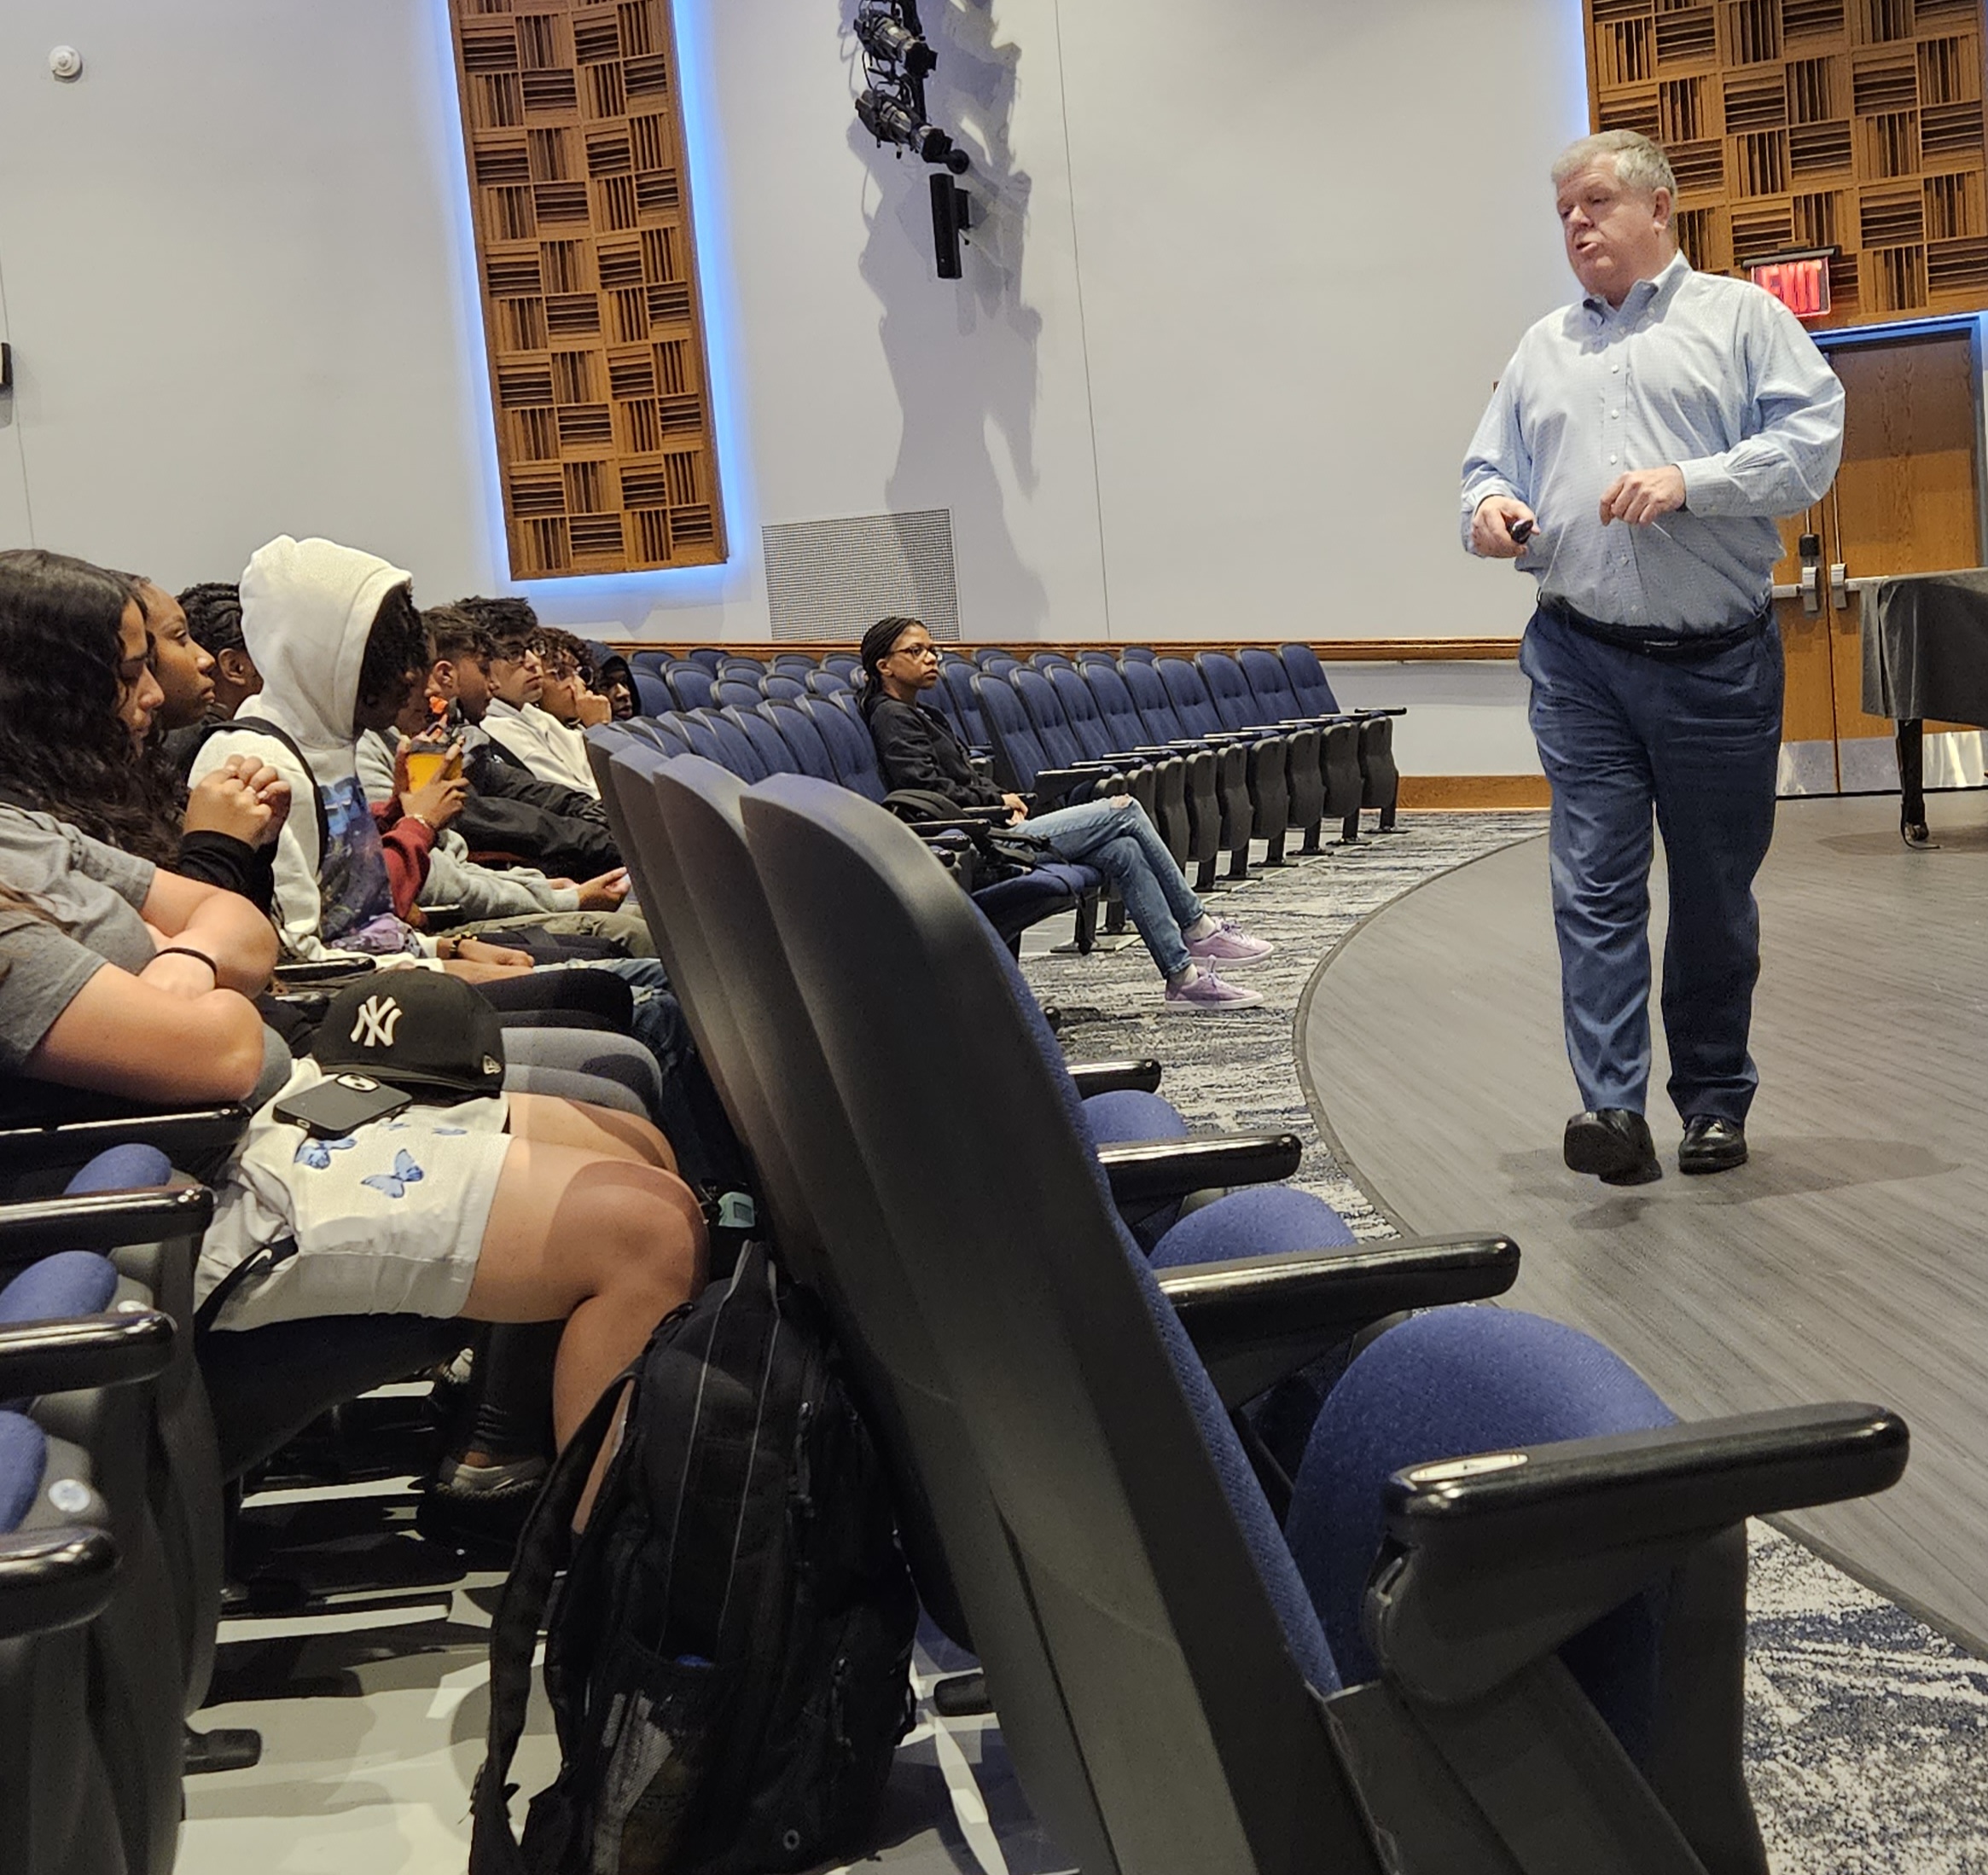 Officials from the Town of Babylon spoke to NBHS students about using the power of their voice to bring change and about internship opportunities in local government.